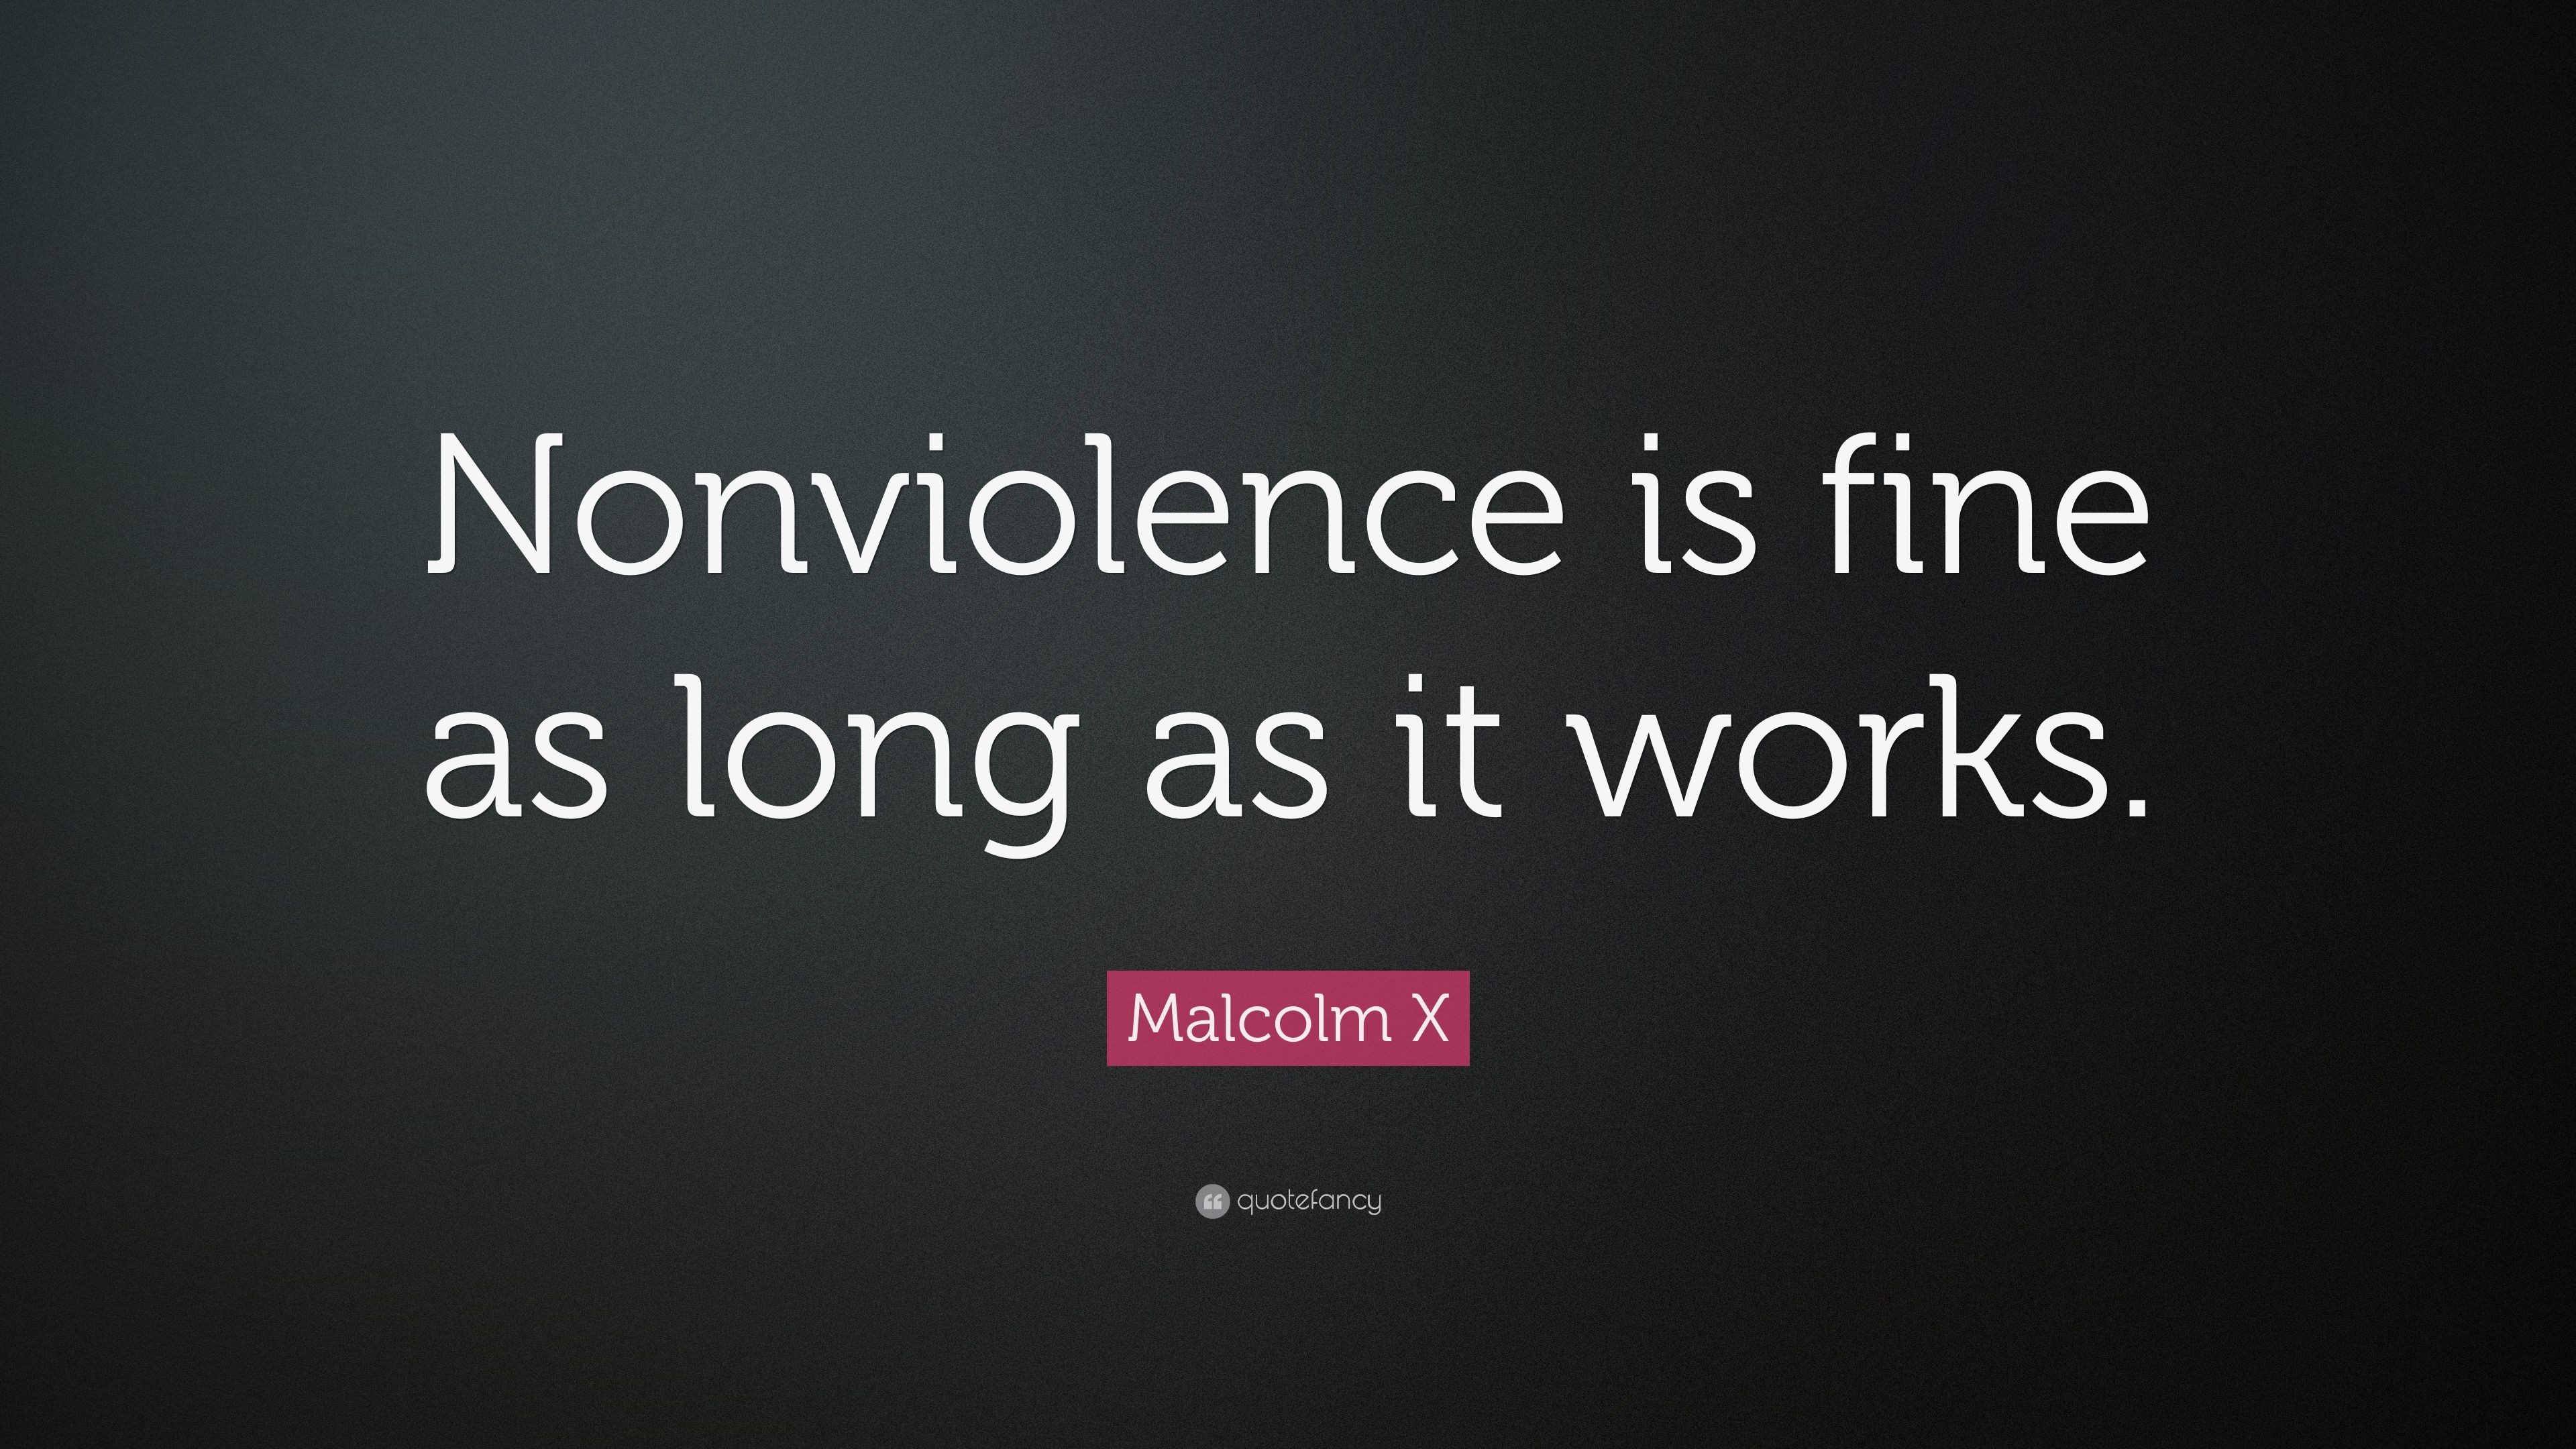 3840x2160 Malcolm X Quote: “Nonviolence is fine as long as it works.”